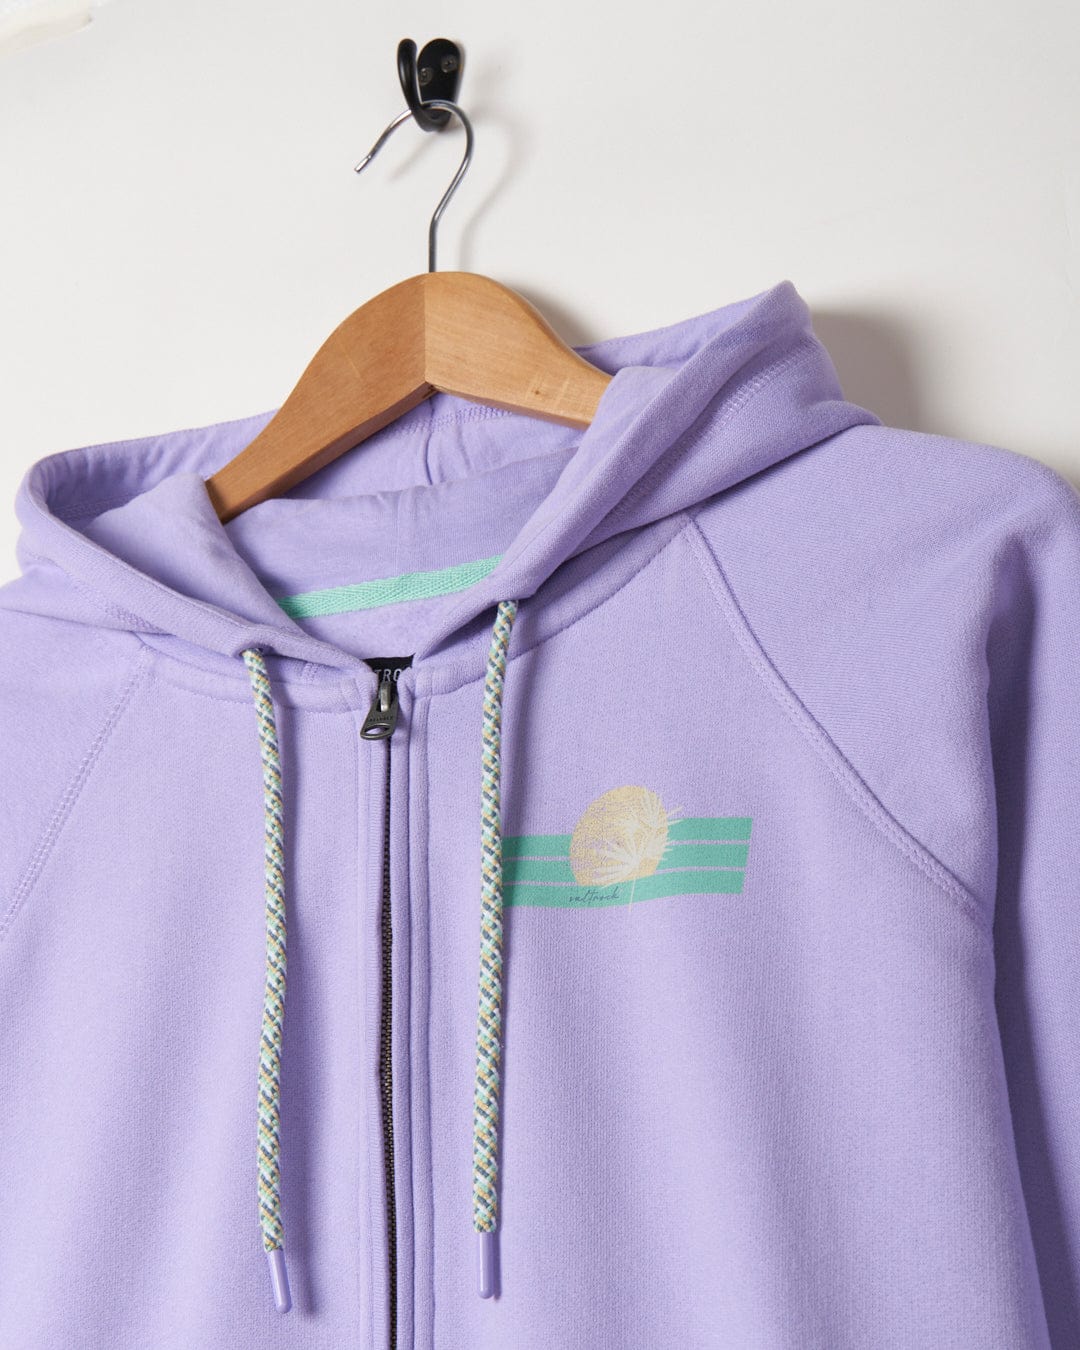 A Lilac Saltrock hoodie with a green stripe on it.